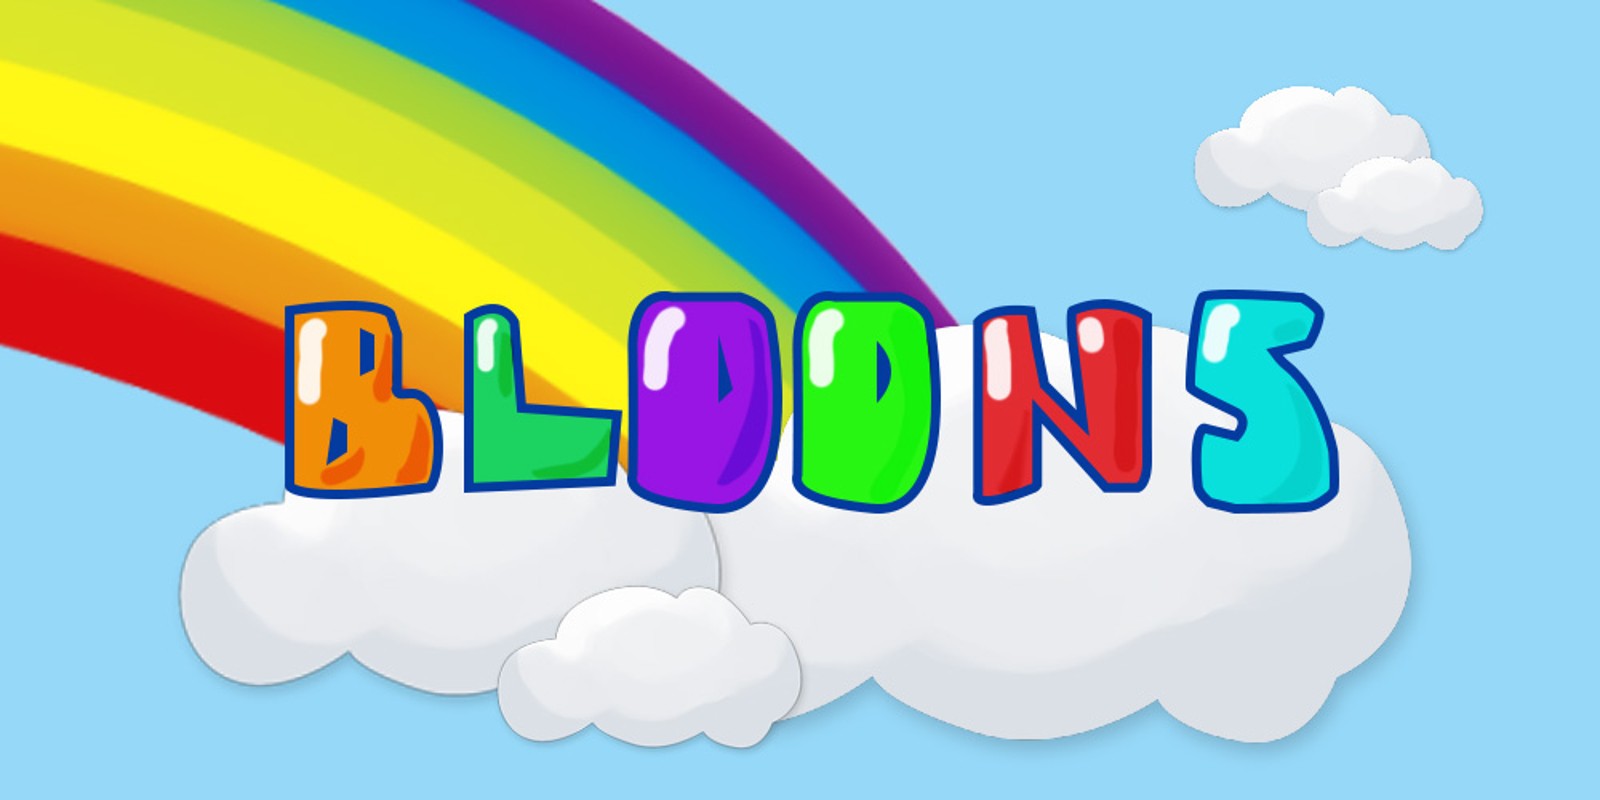 Bloons® TD 4